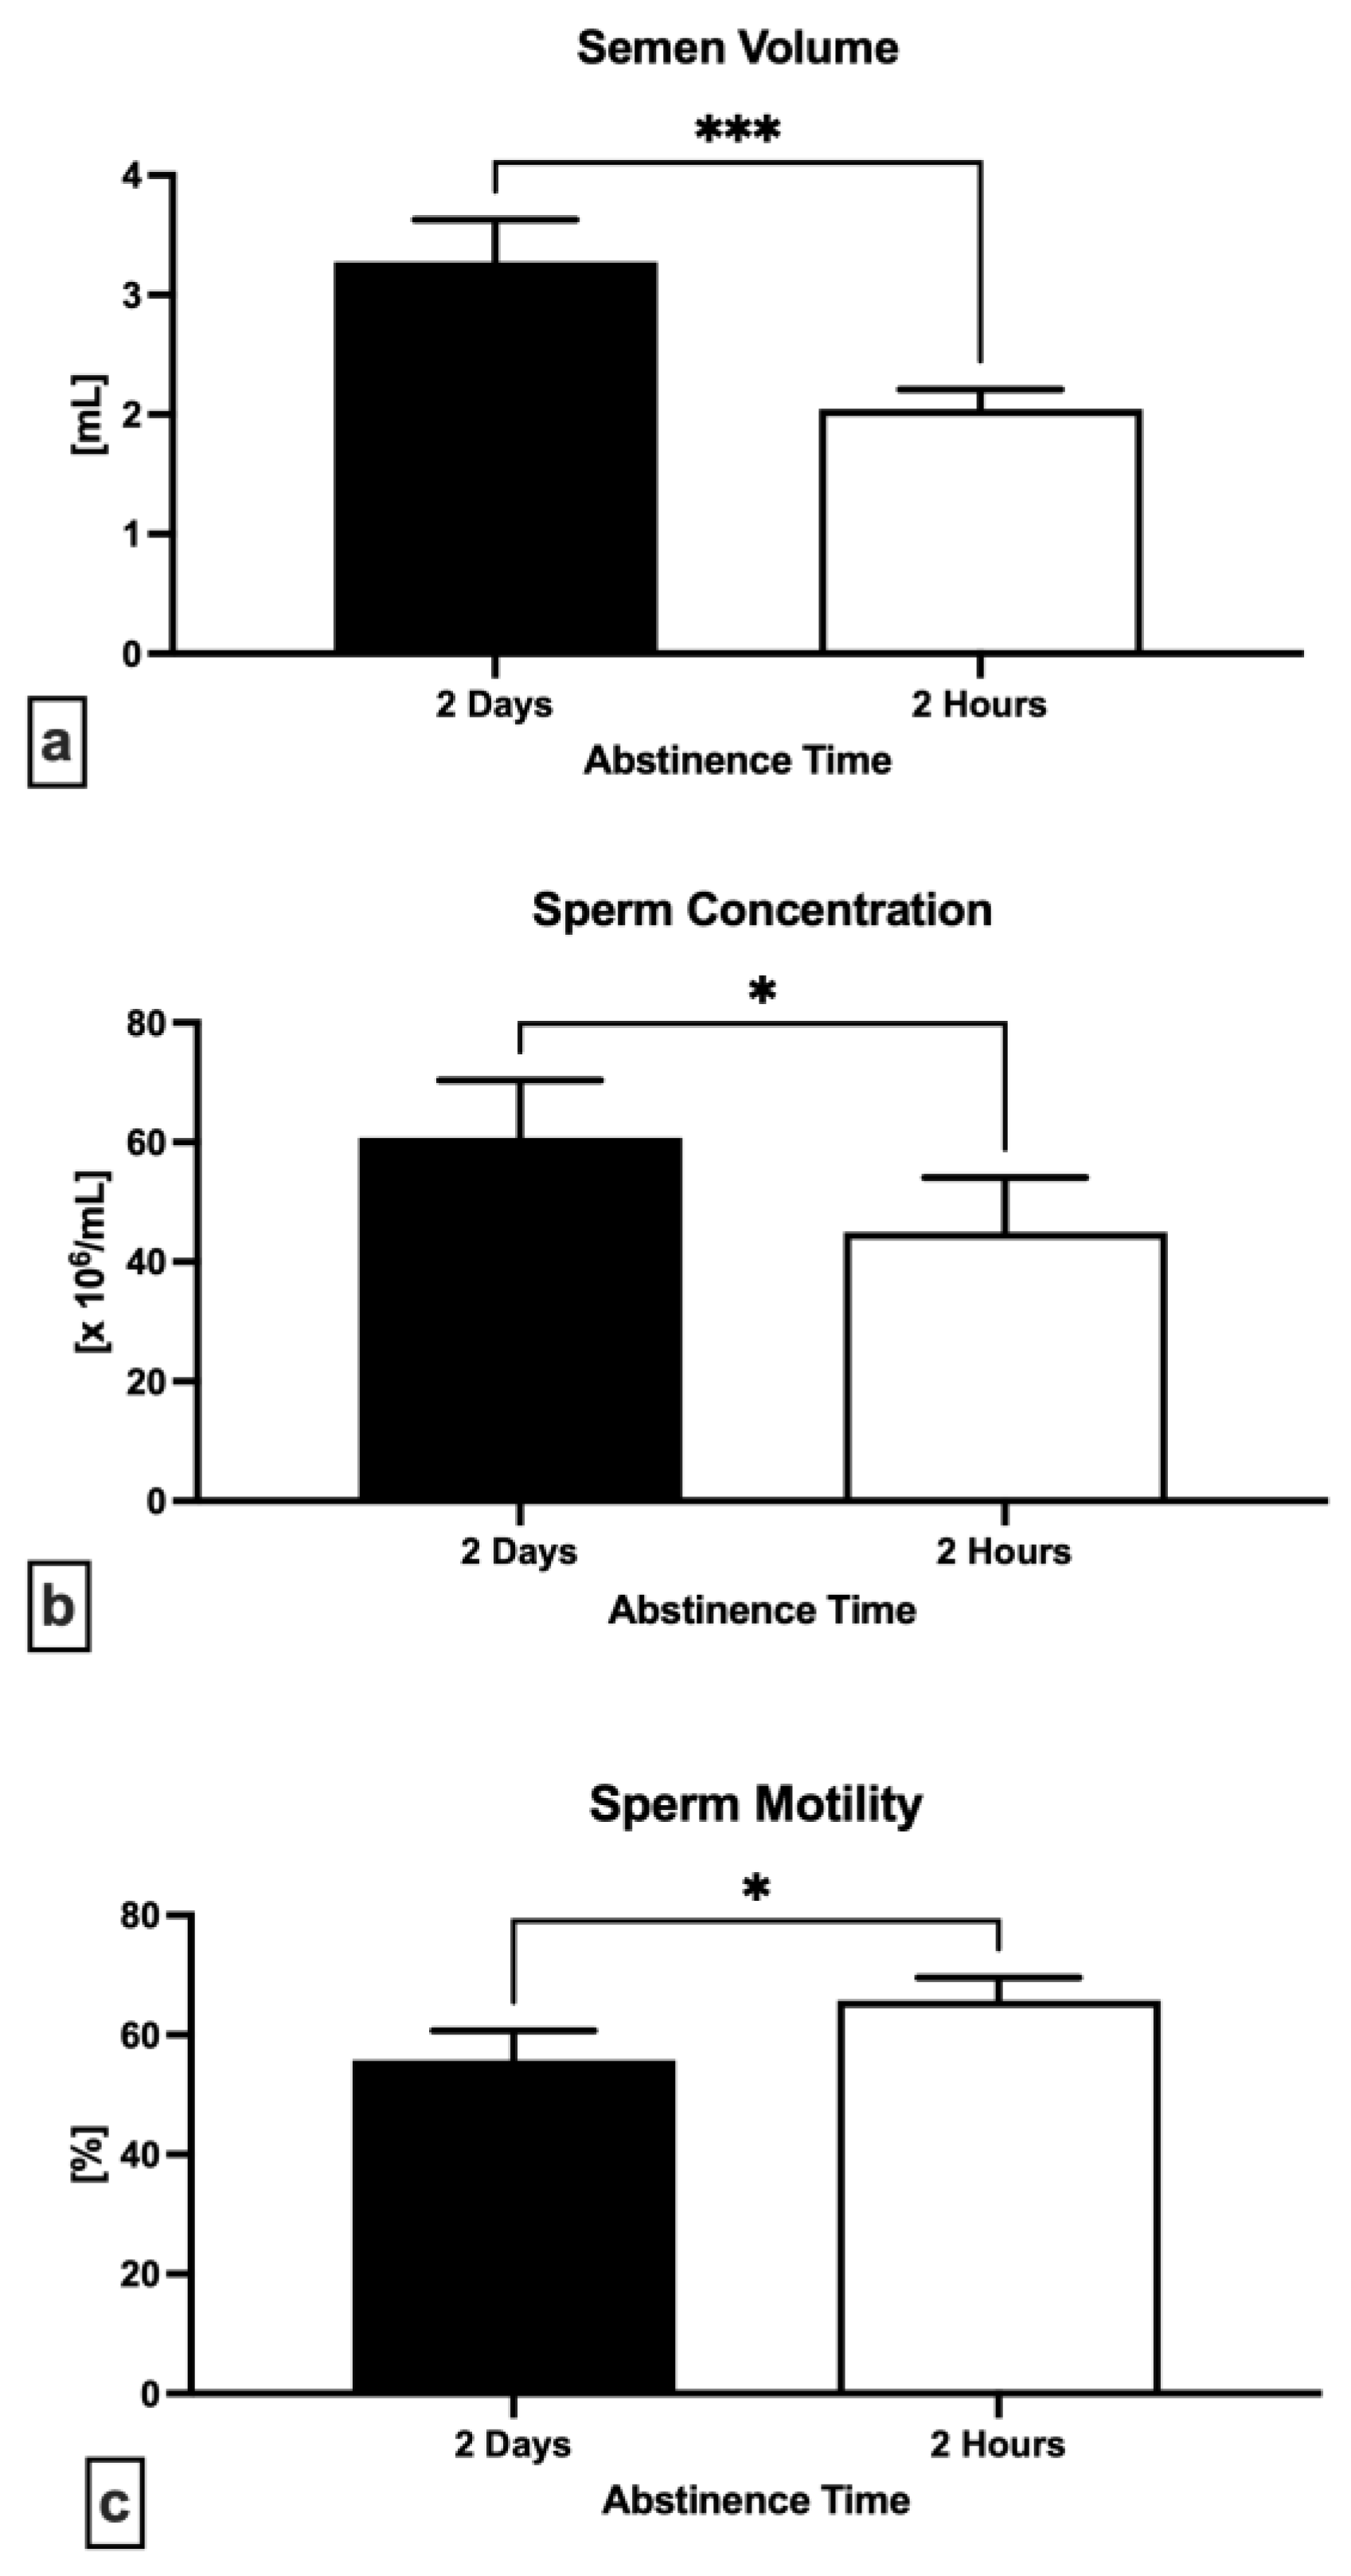 IJMS Free Full-Text Ejaculatory Abstinence Affects the Sperm Quality in Normozoospermic Menandmdash;How Does the Seminal Bacteriome Respond?